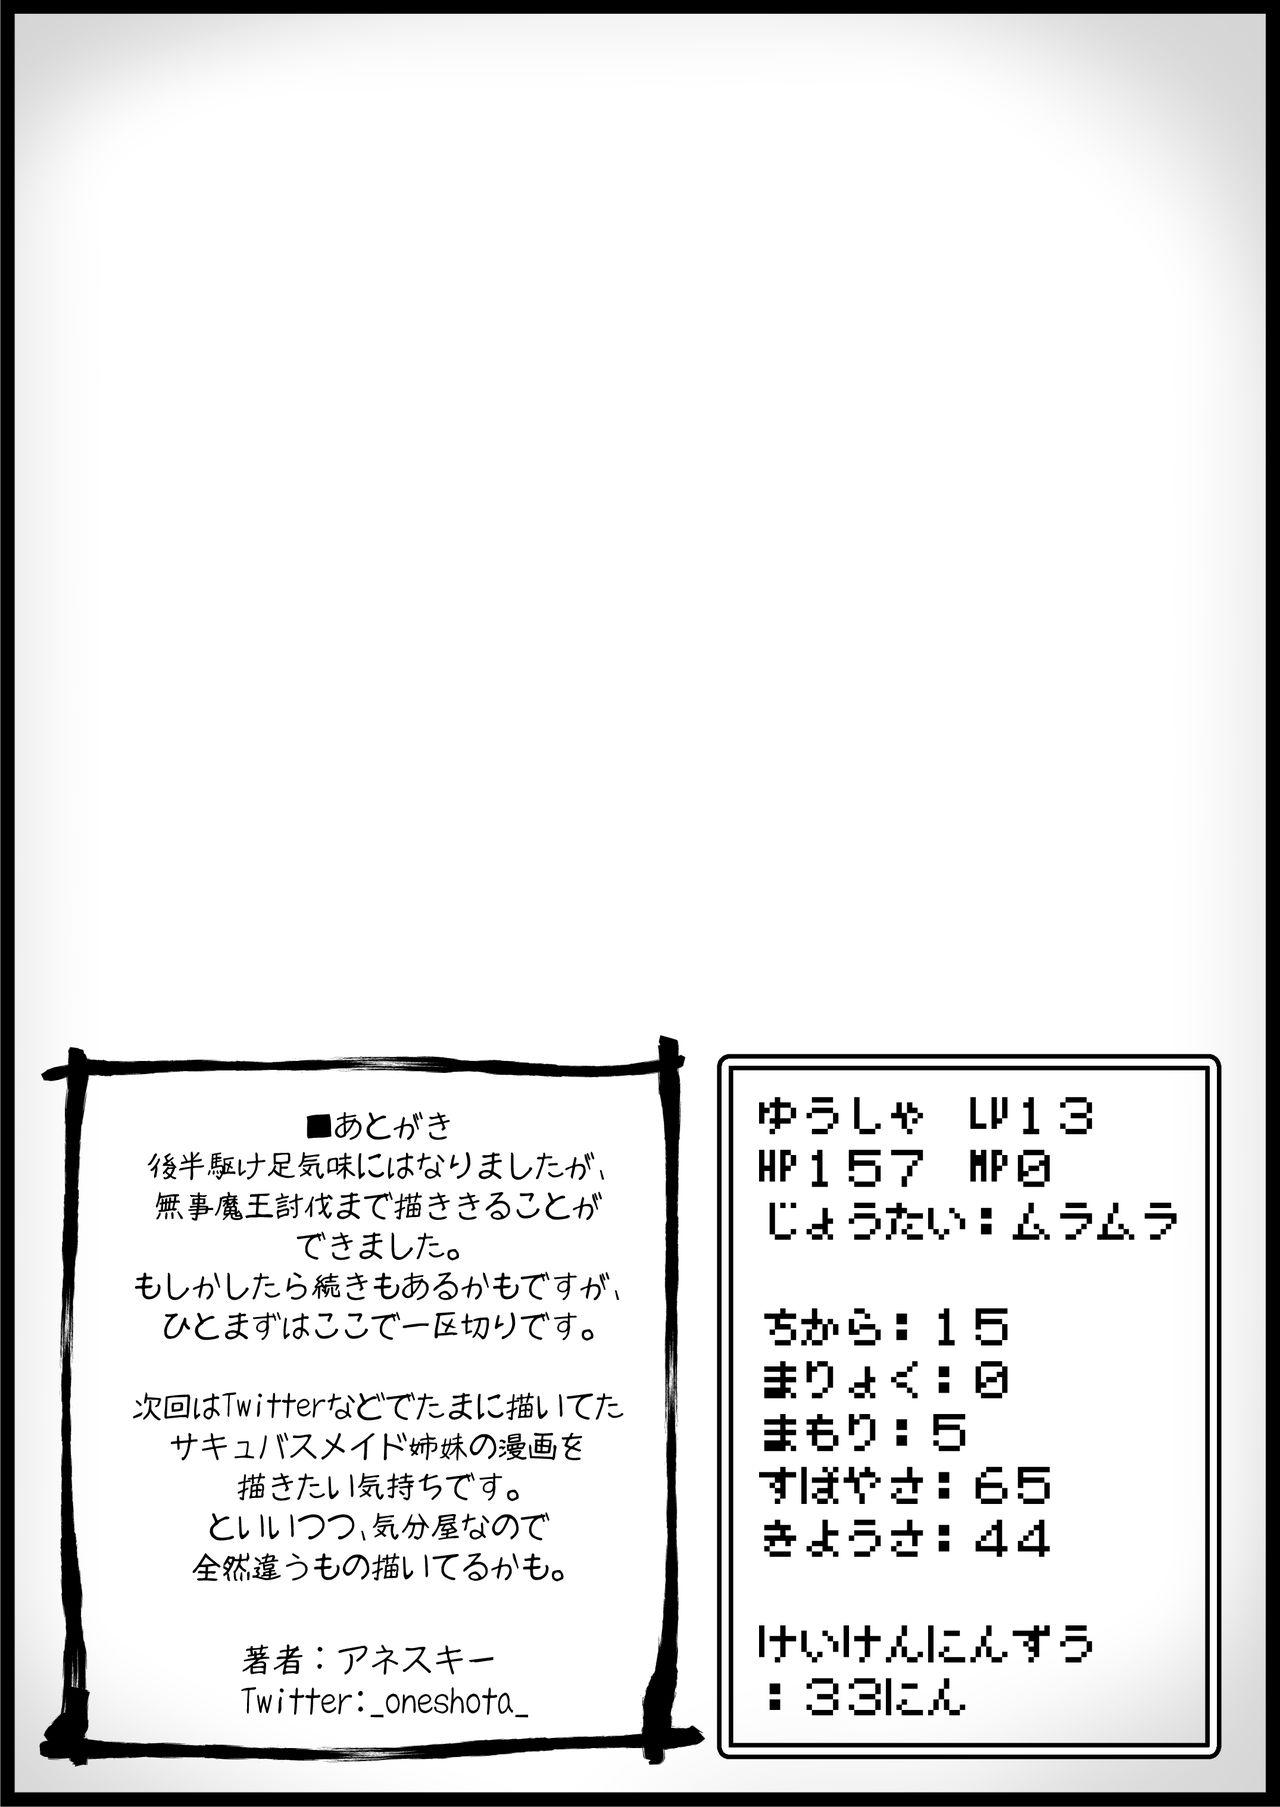 [Succubus Egg] Fantasy World 2 Too Forgiving to Heroes-Continued NPC (mob) Opponent-Centered Short H Manga Collection- 56